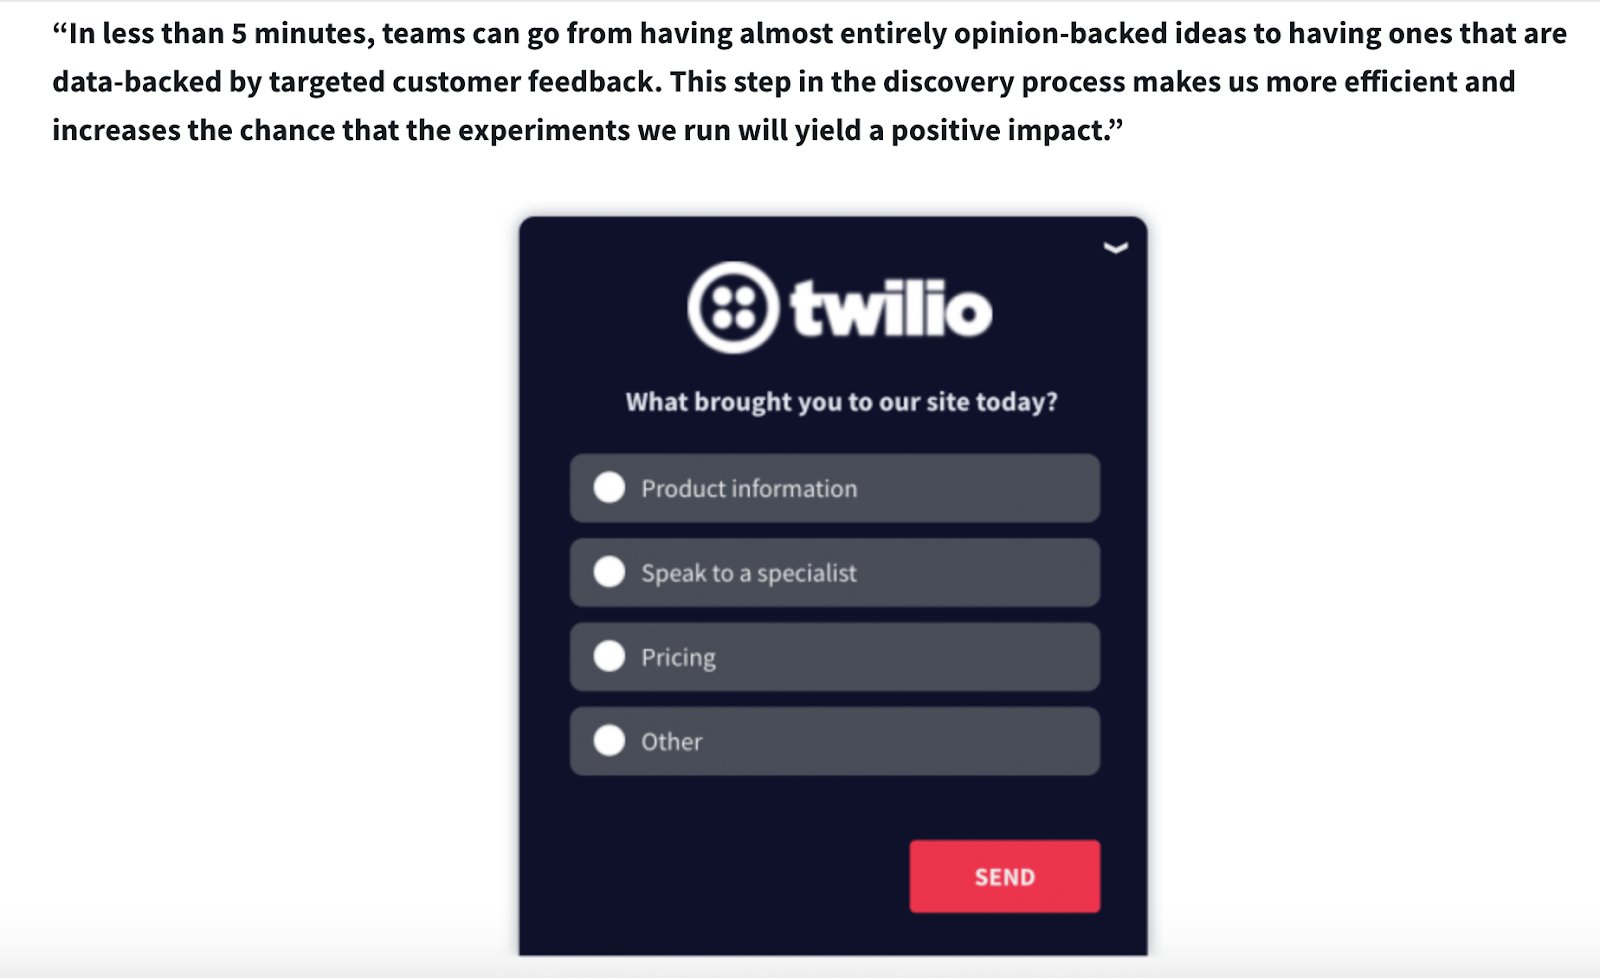 a screenshot of the sample questions used by twilio for on-site surveys